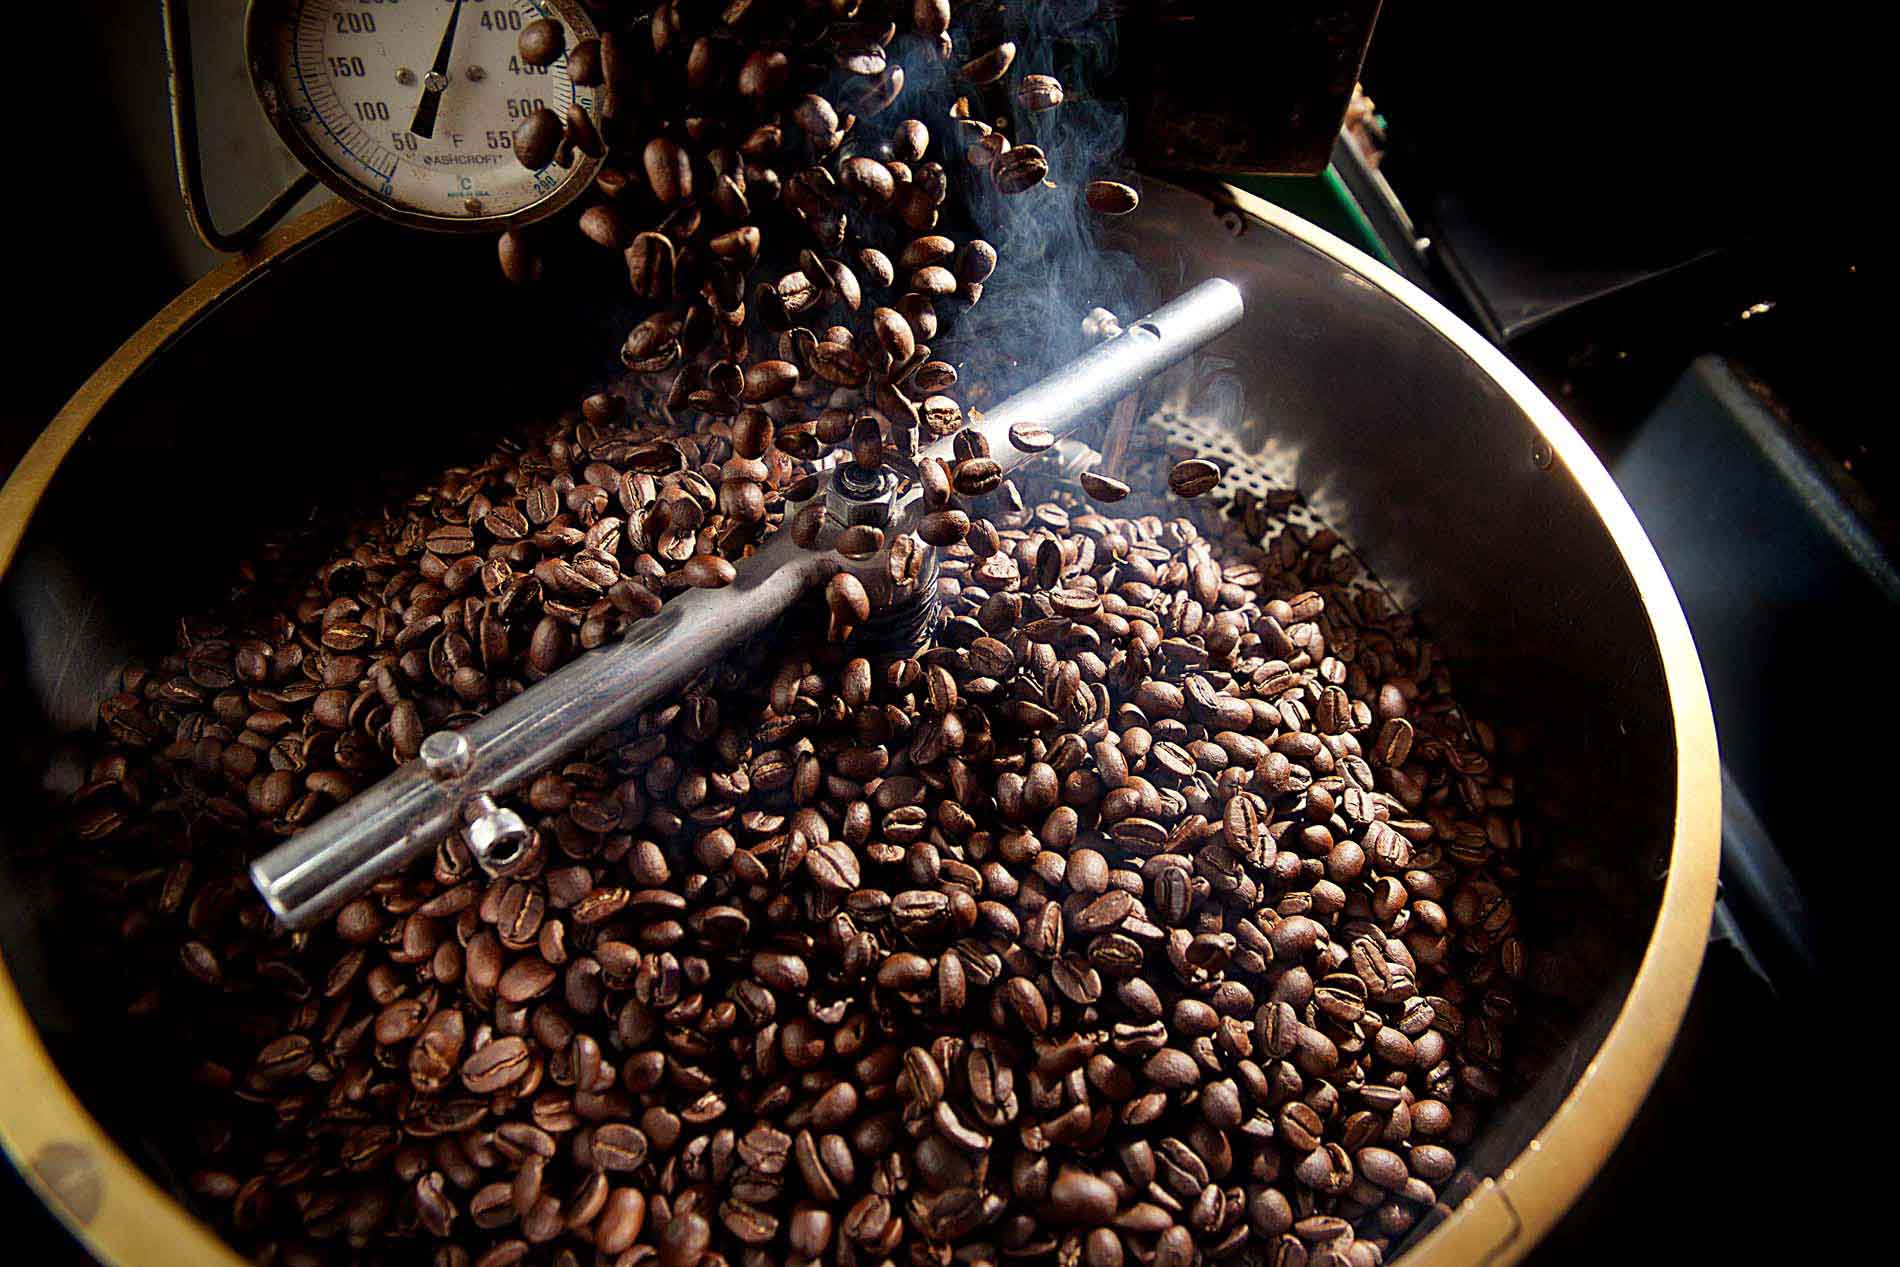 Around US$4 million invested in the Mexican coffee industry